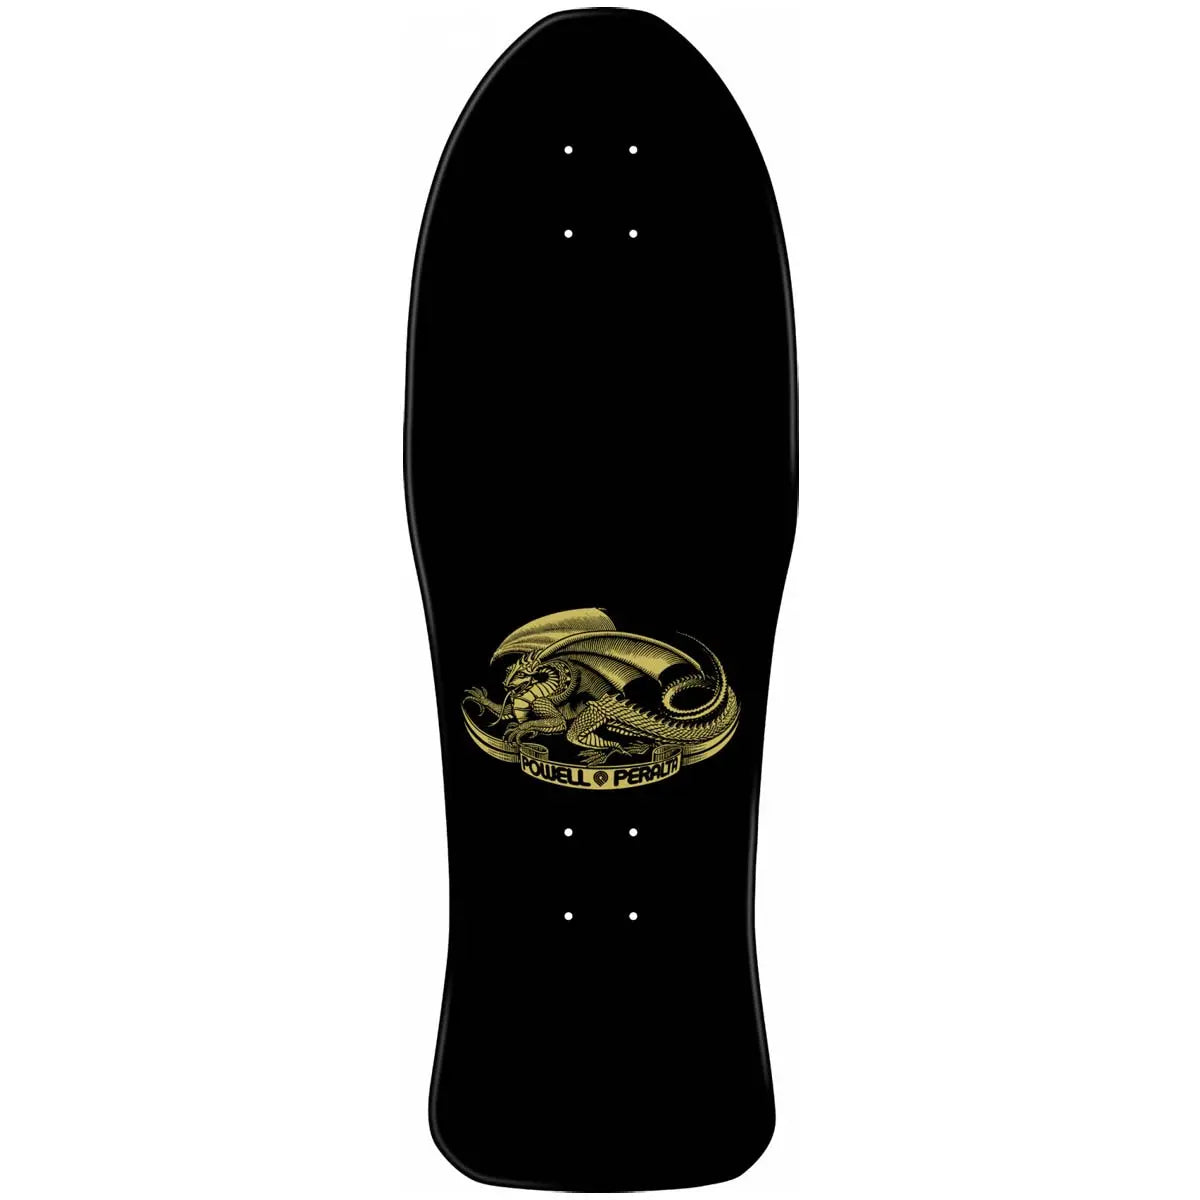 Powell Peralta Cab Chinese Dragon 10 Deck POWELL PERALTA